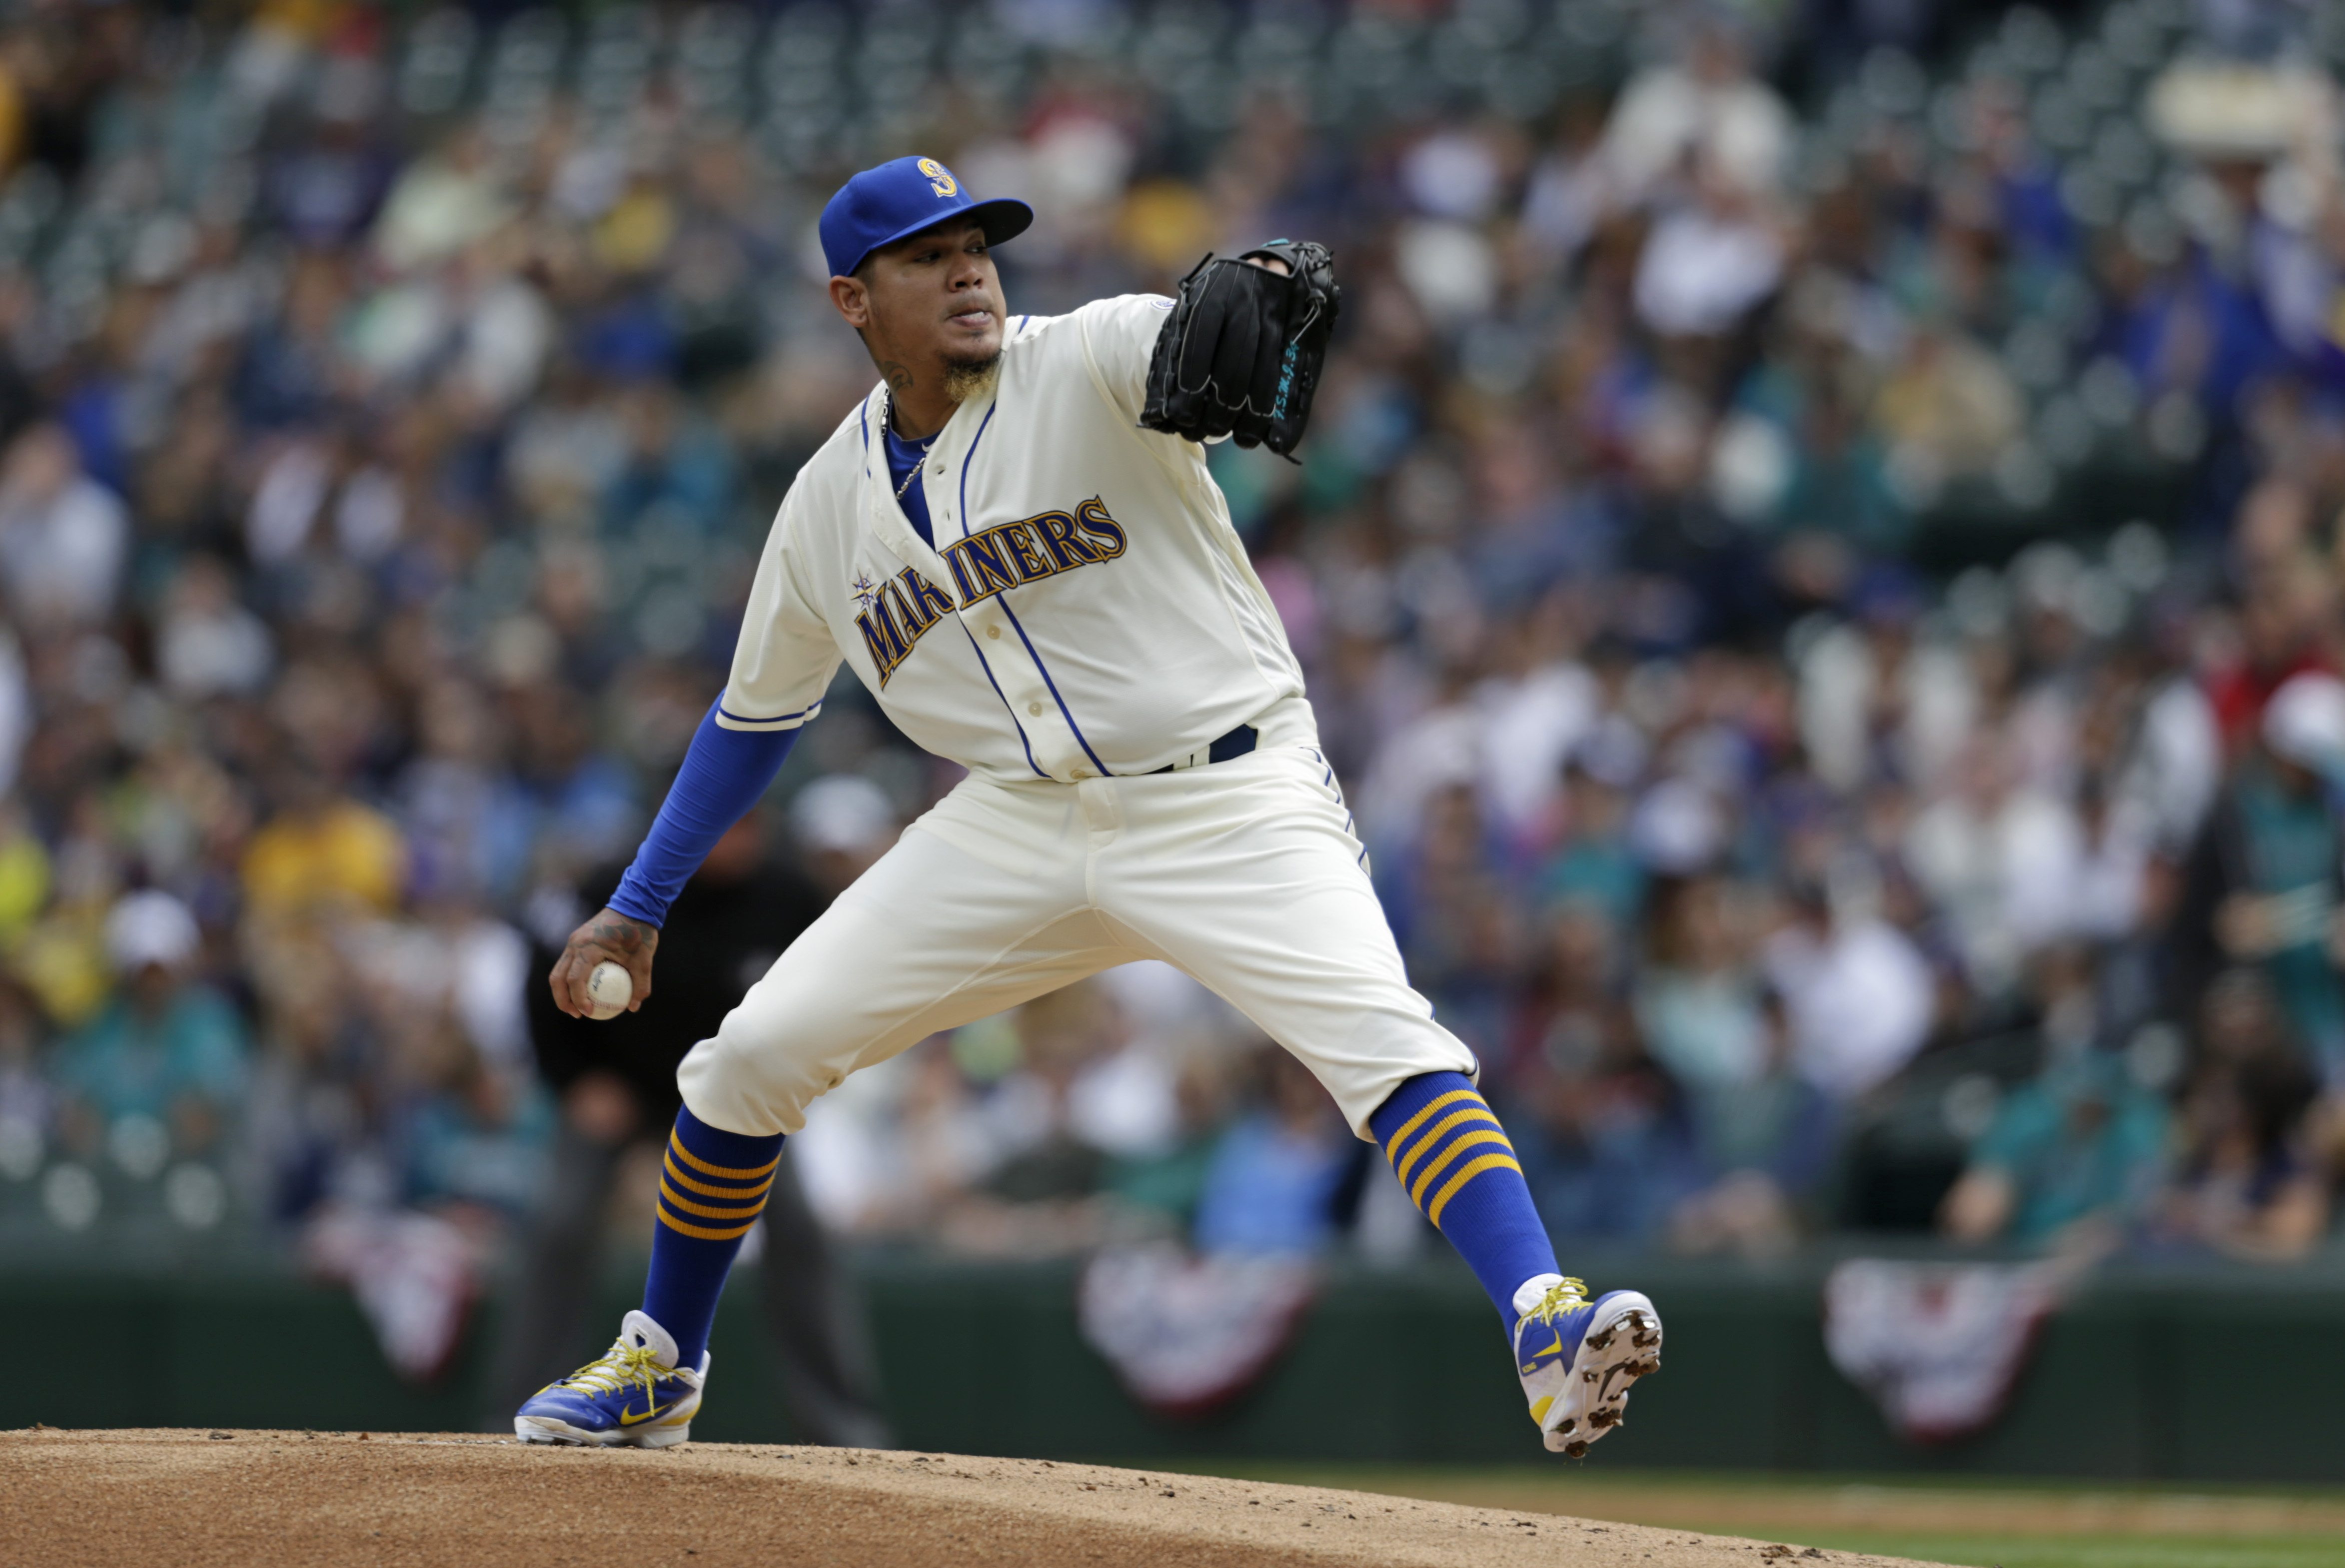 Seattle Mariners starting pitcher Felix Hernandez works against the Oakland Athletics during a baseball game on Sunday, April 10, 2016, in Seattle.